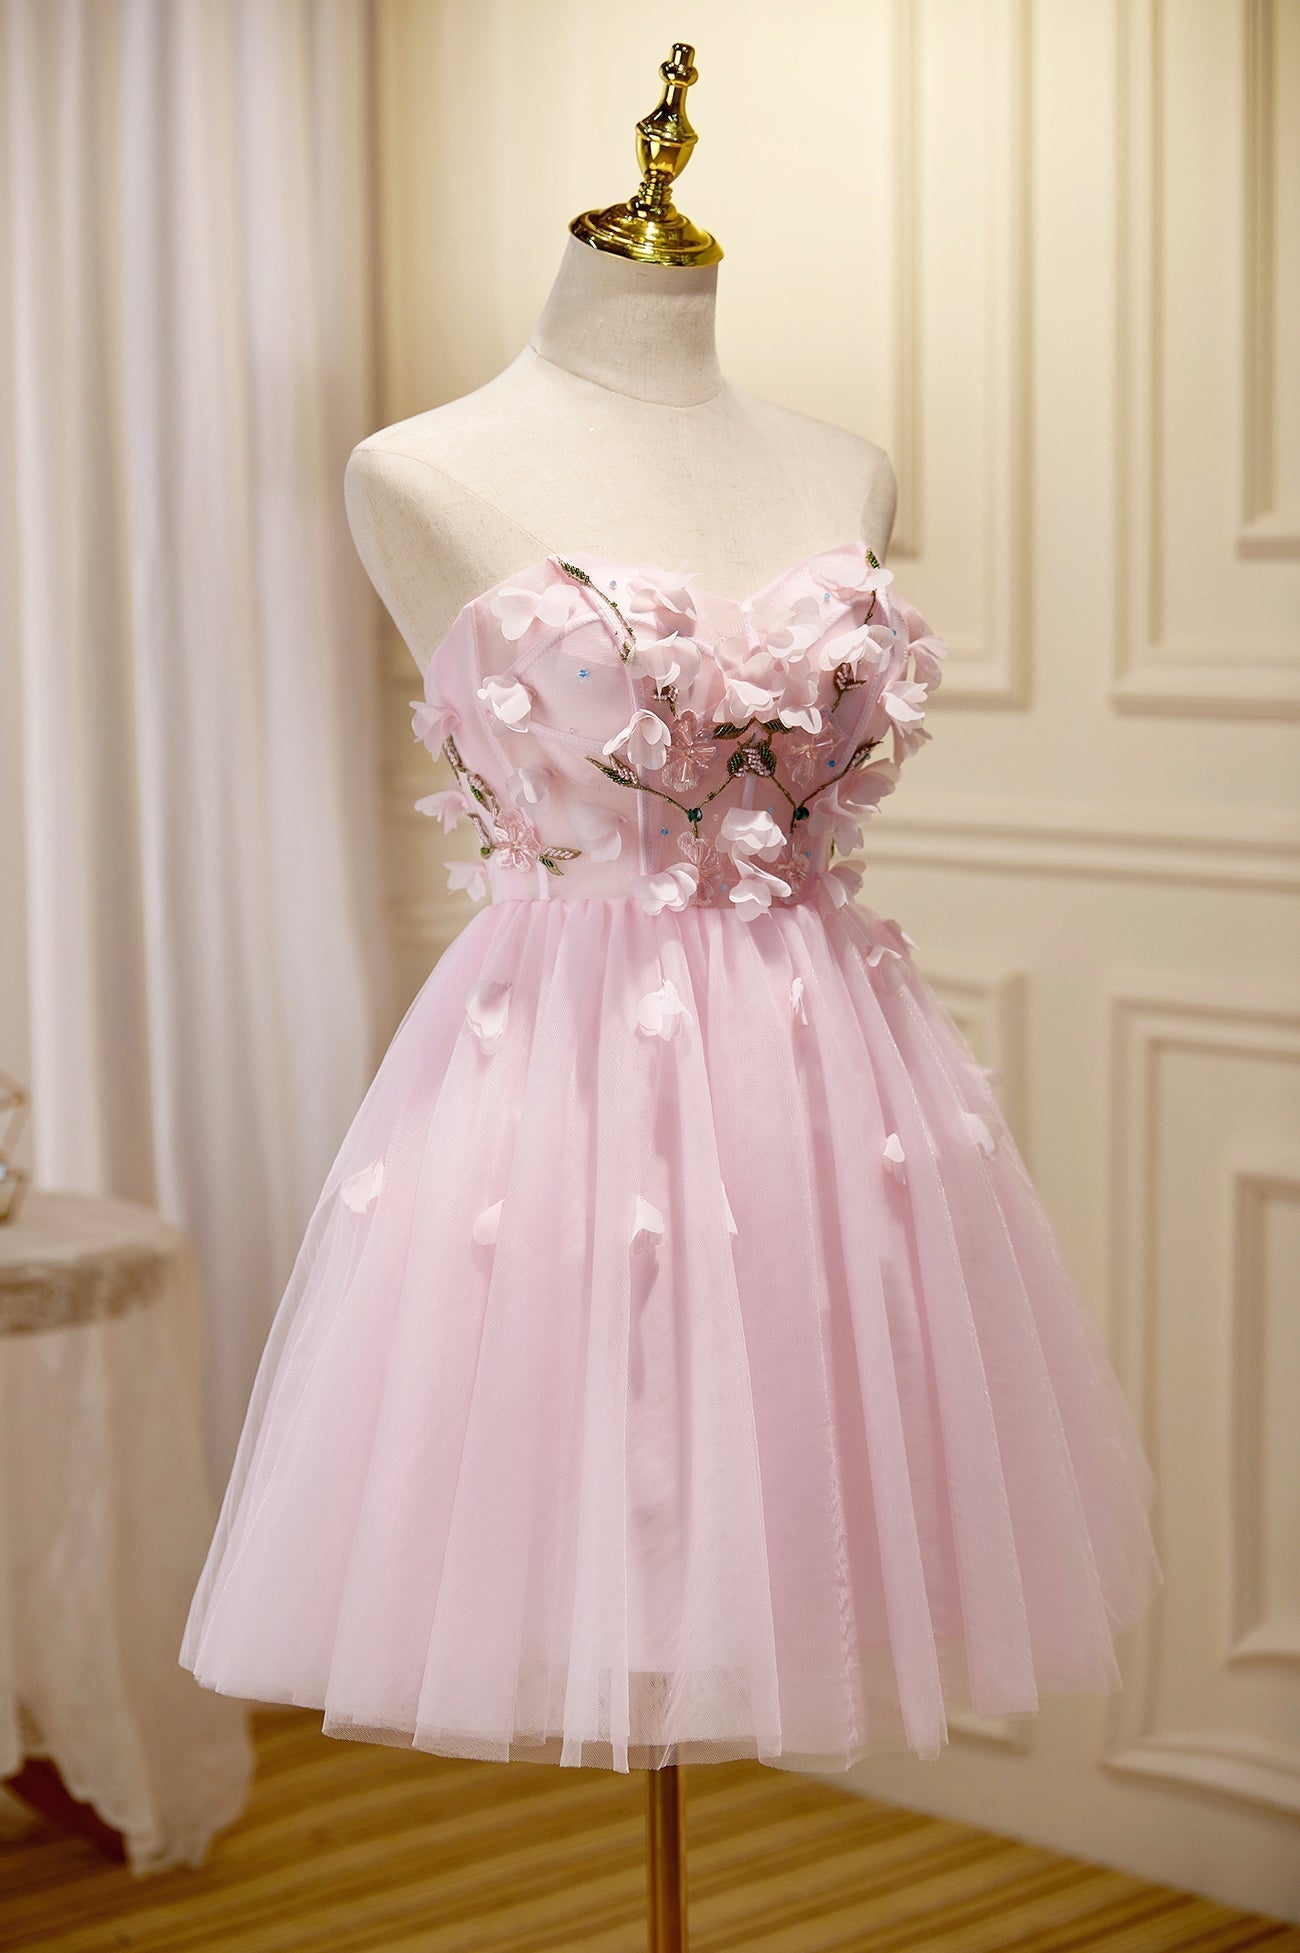 Homecoming Dresses 2035, Pink Tulle Short Prom Dress, Pink A-Line Strapless Homecoming Dress